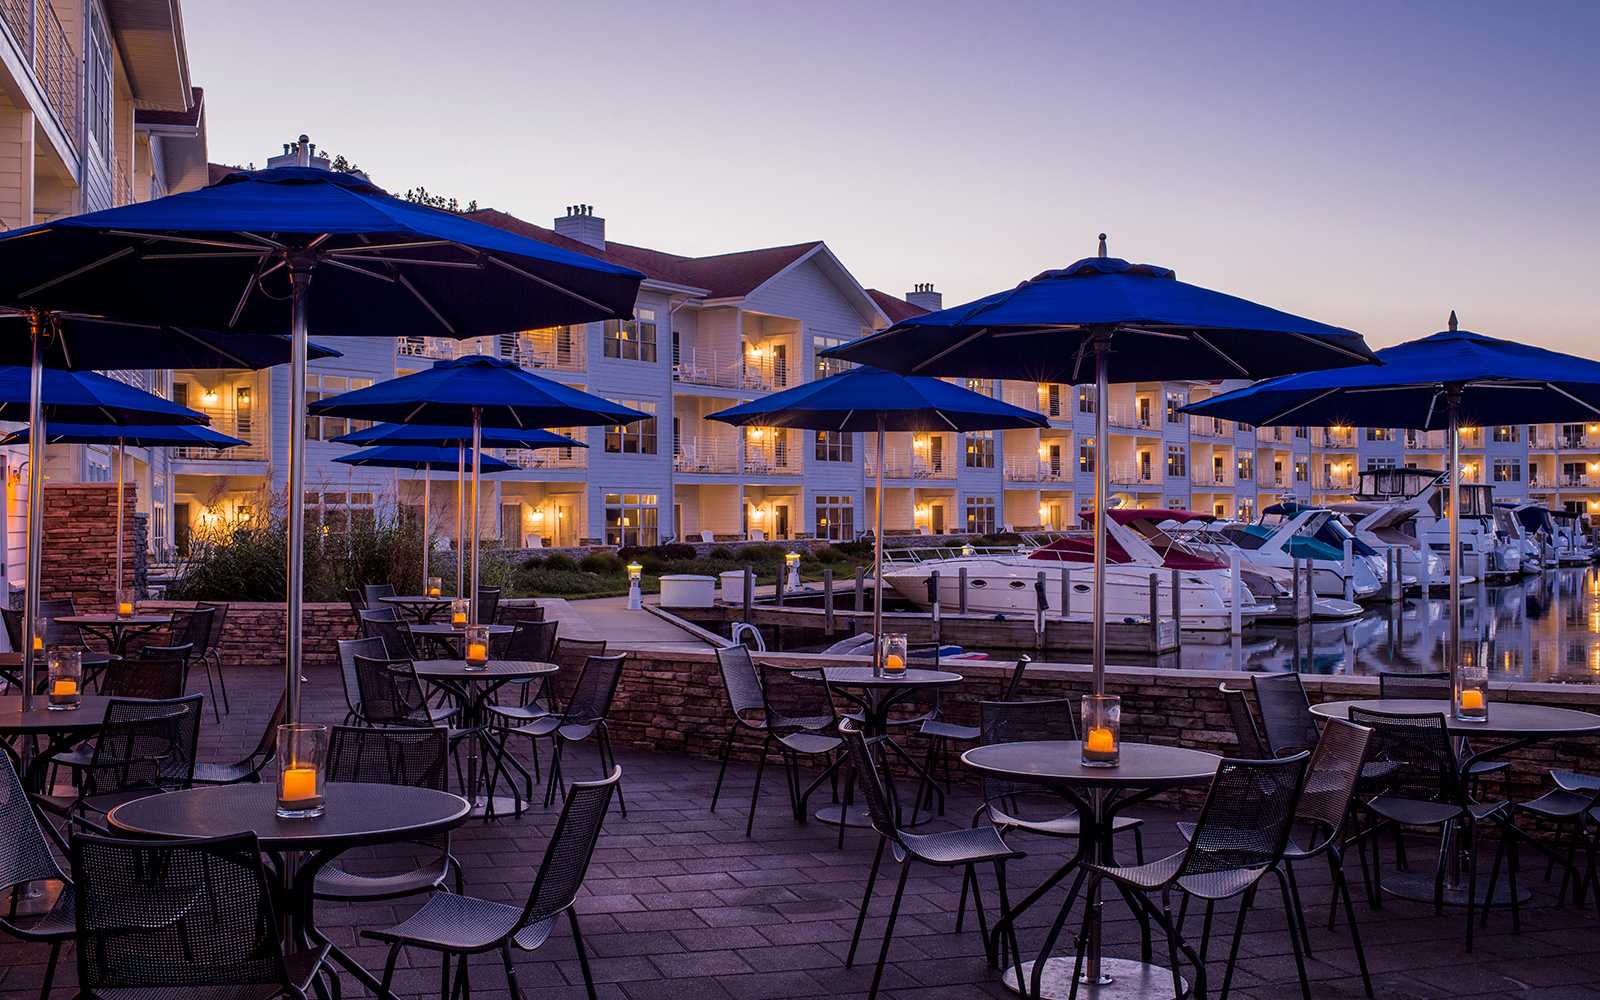 outdoor restaurant patio at twilight with candles, metal tables and chairs, navy blue umbrellas and a view of hotel exterior, marina and boats